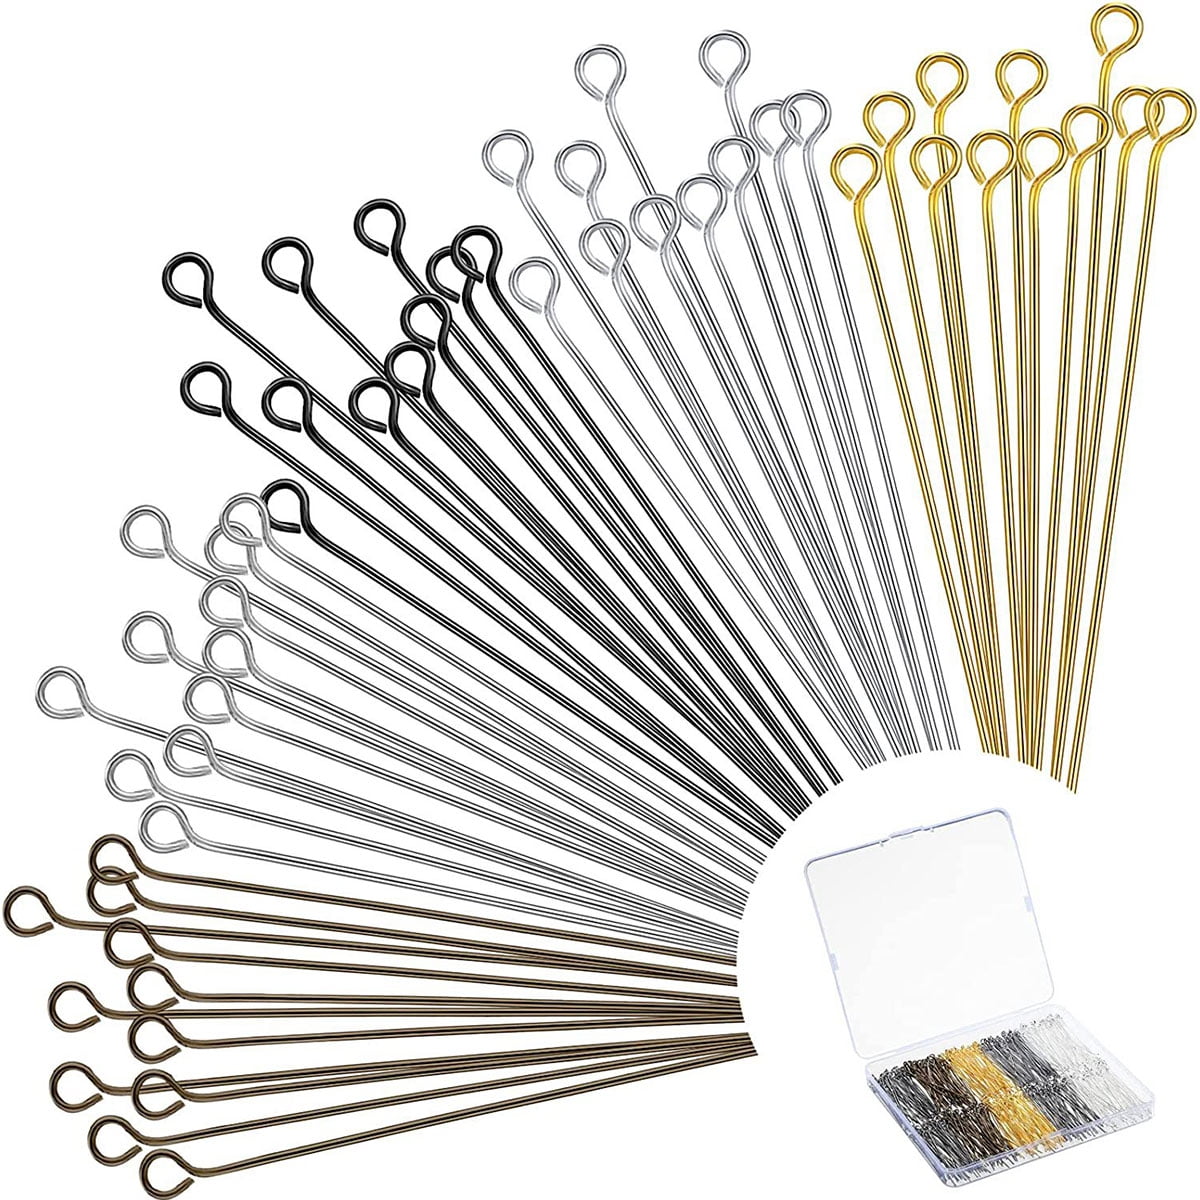 Head Pins & Eye Pins  Artbeads - Findings & Components